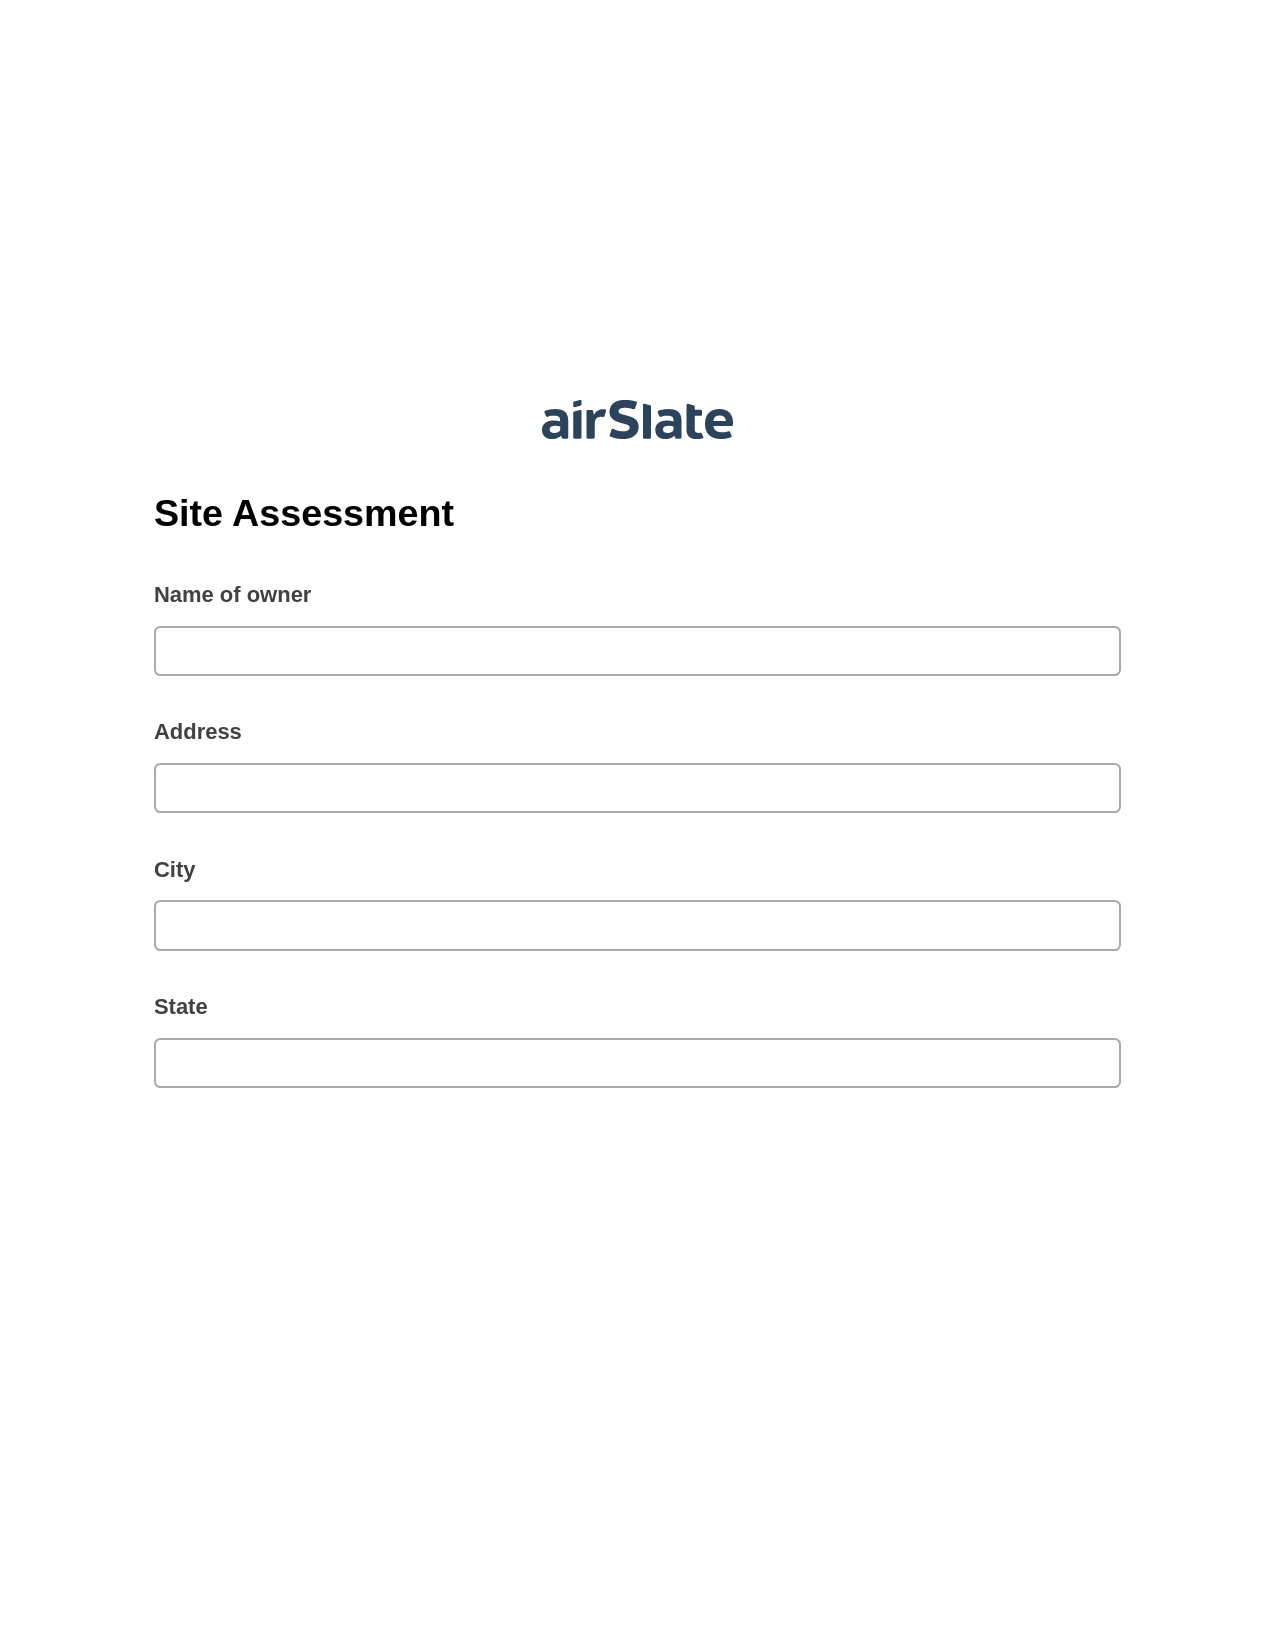 Site Assessment Pre-fill Slate from MS Dynamics 365 Records Bot, System Bot - Create a Slate in another Flow, Google Drive Bot